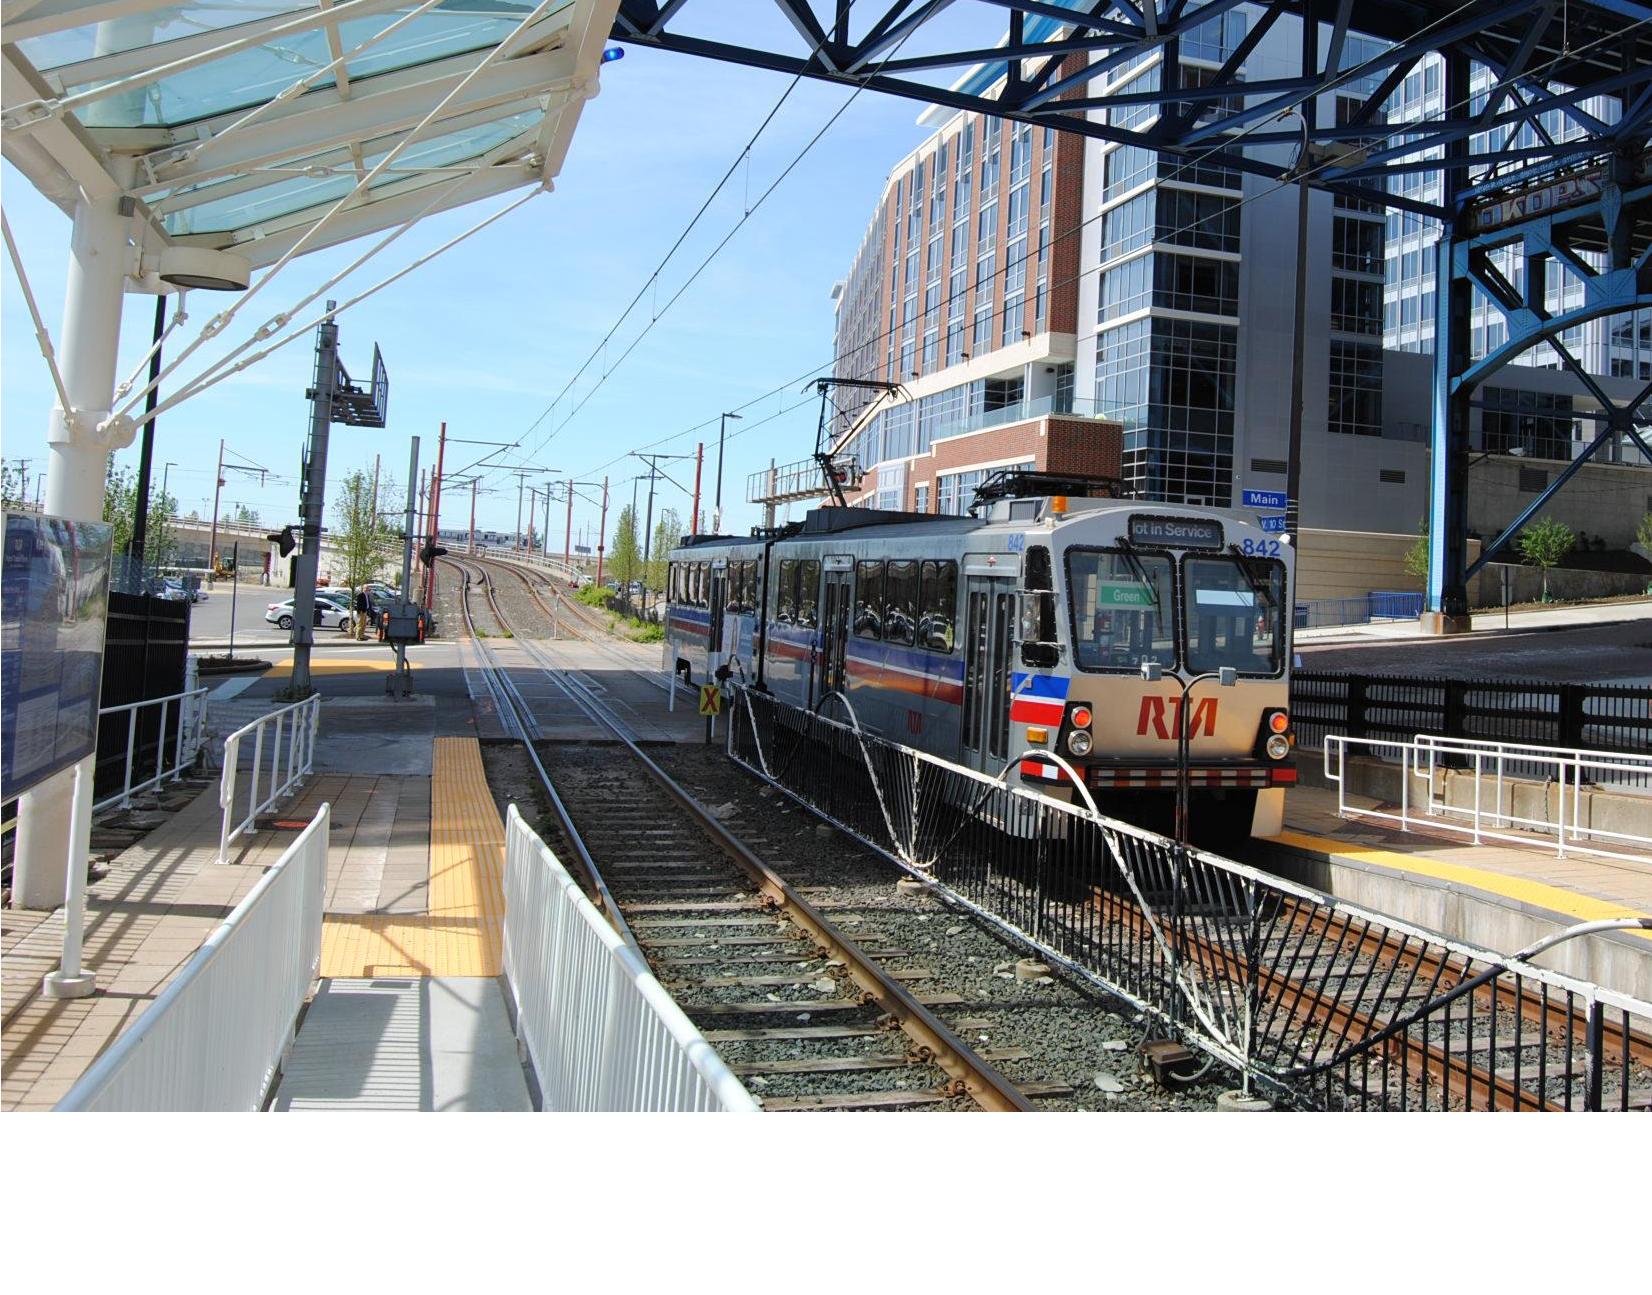  May 27-29, 2016: Ride RTA's Waterfront Line to Flats East Bank event